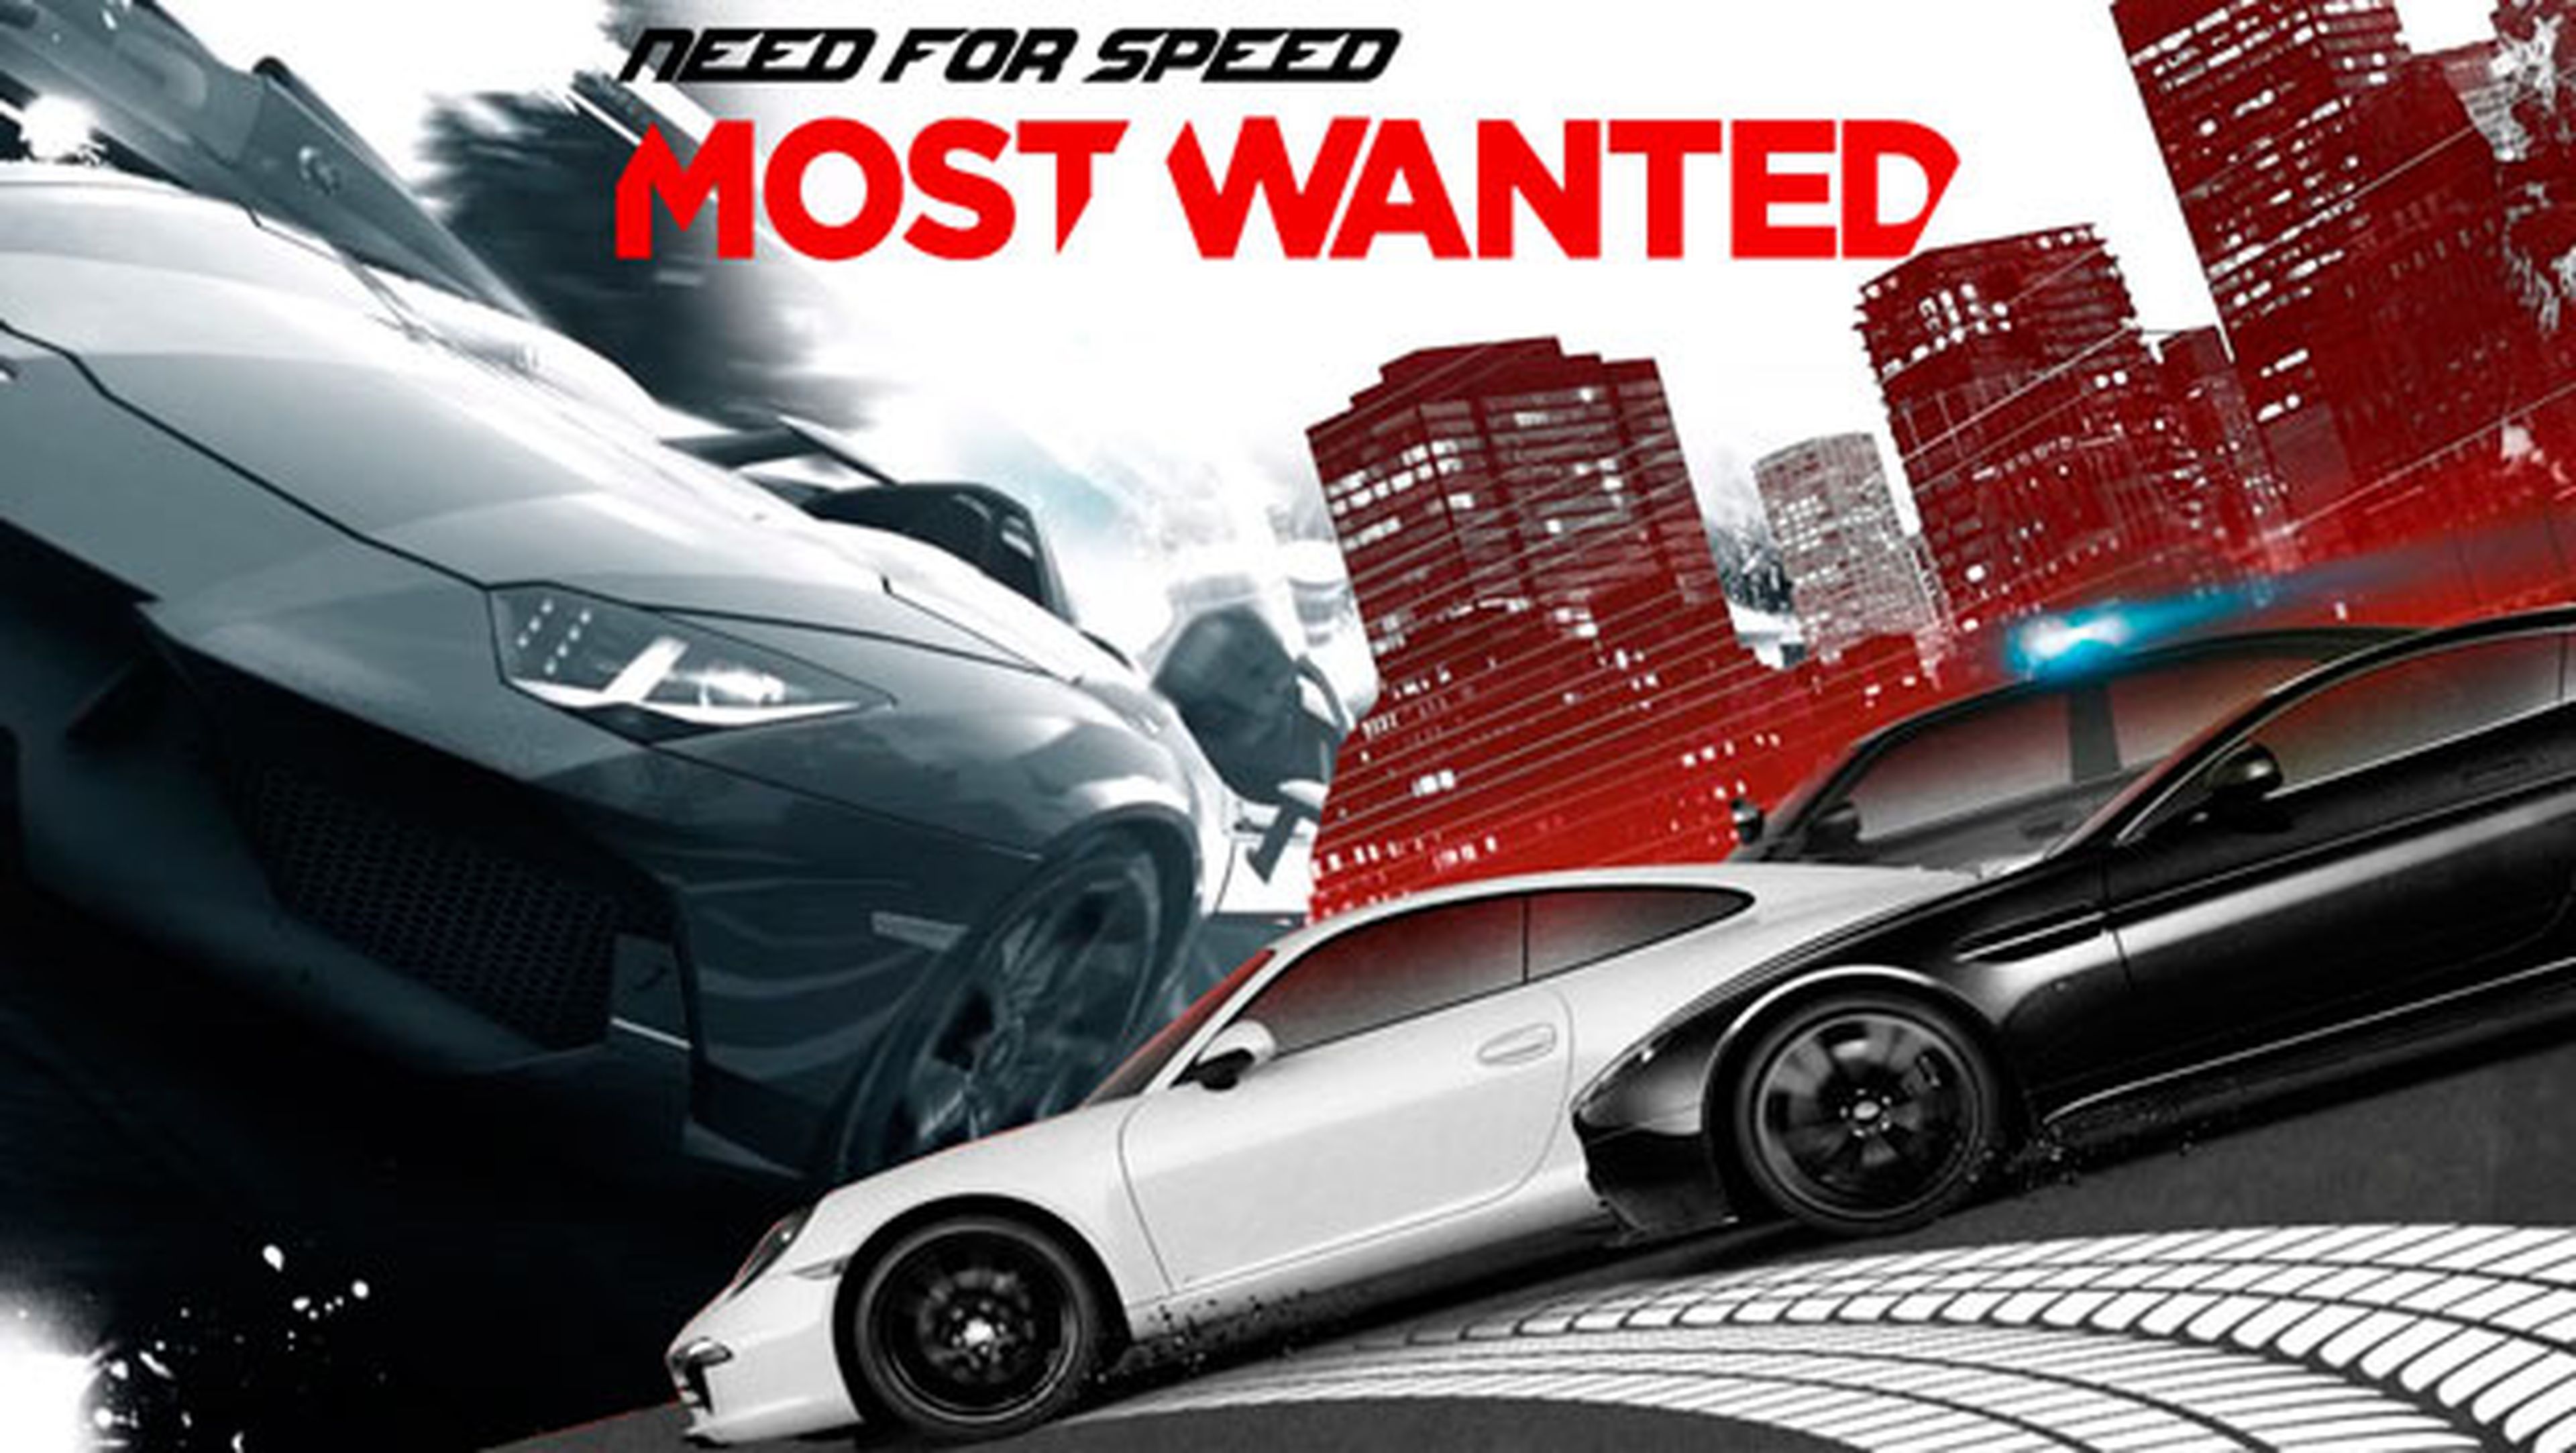 Need for Speed: Most Wanted gratis